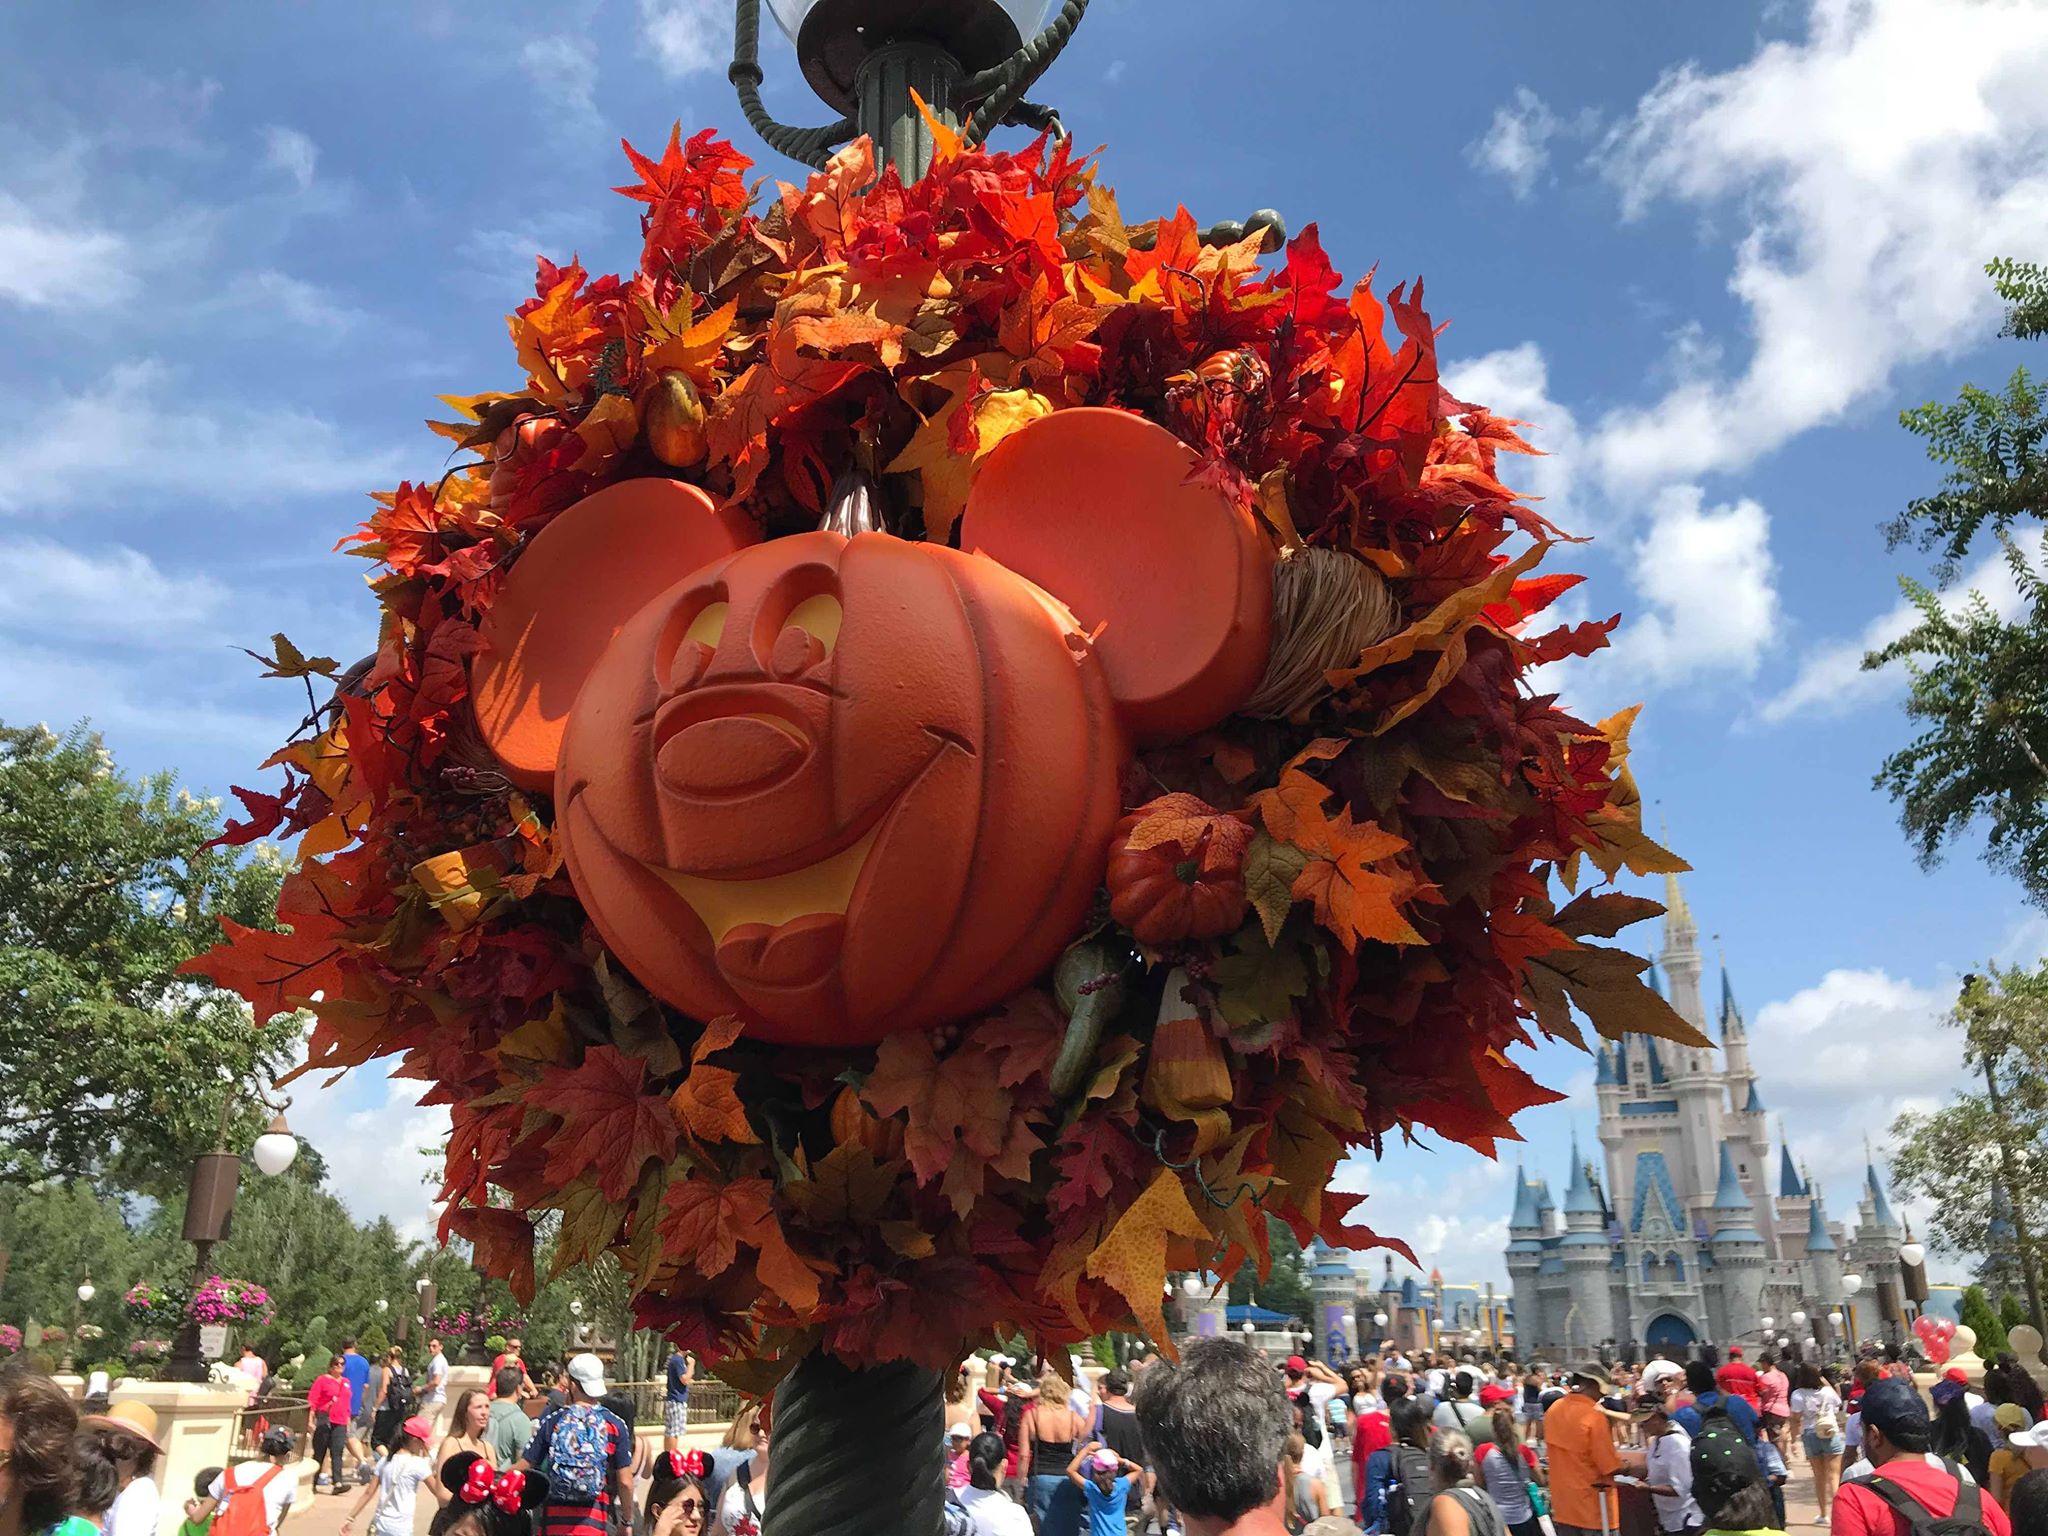 Halloween Decorations Have Started To Go Up At Magic Kingdom!